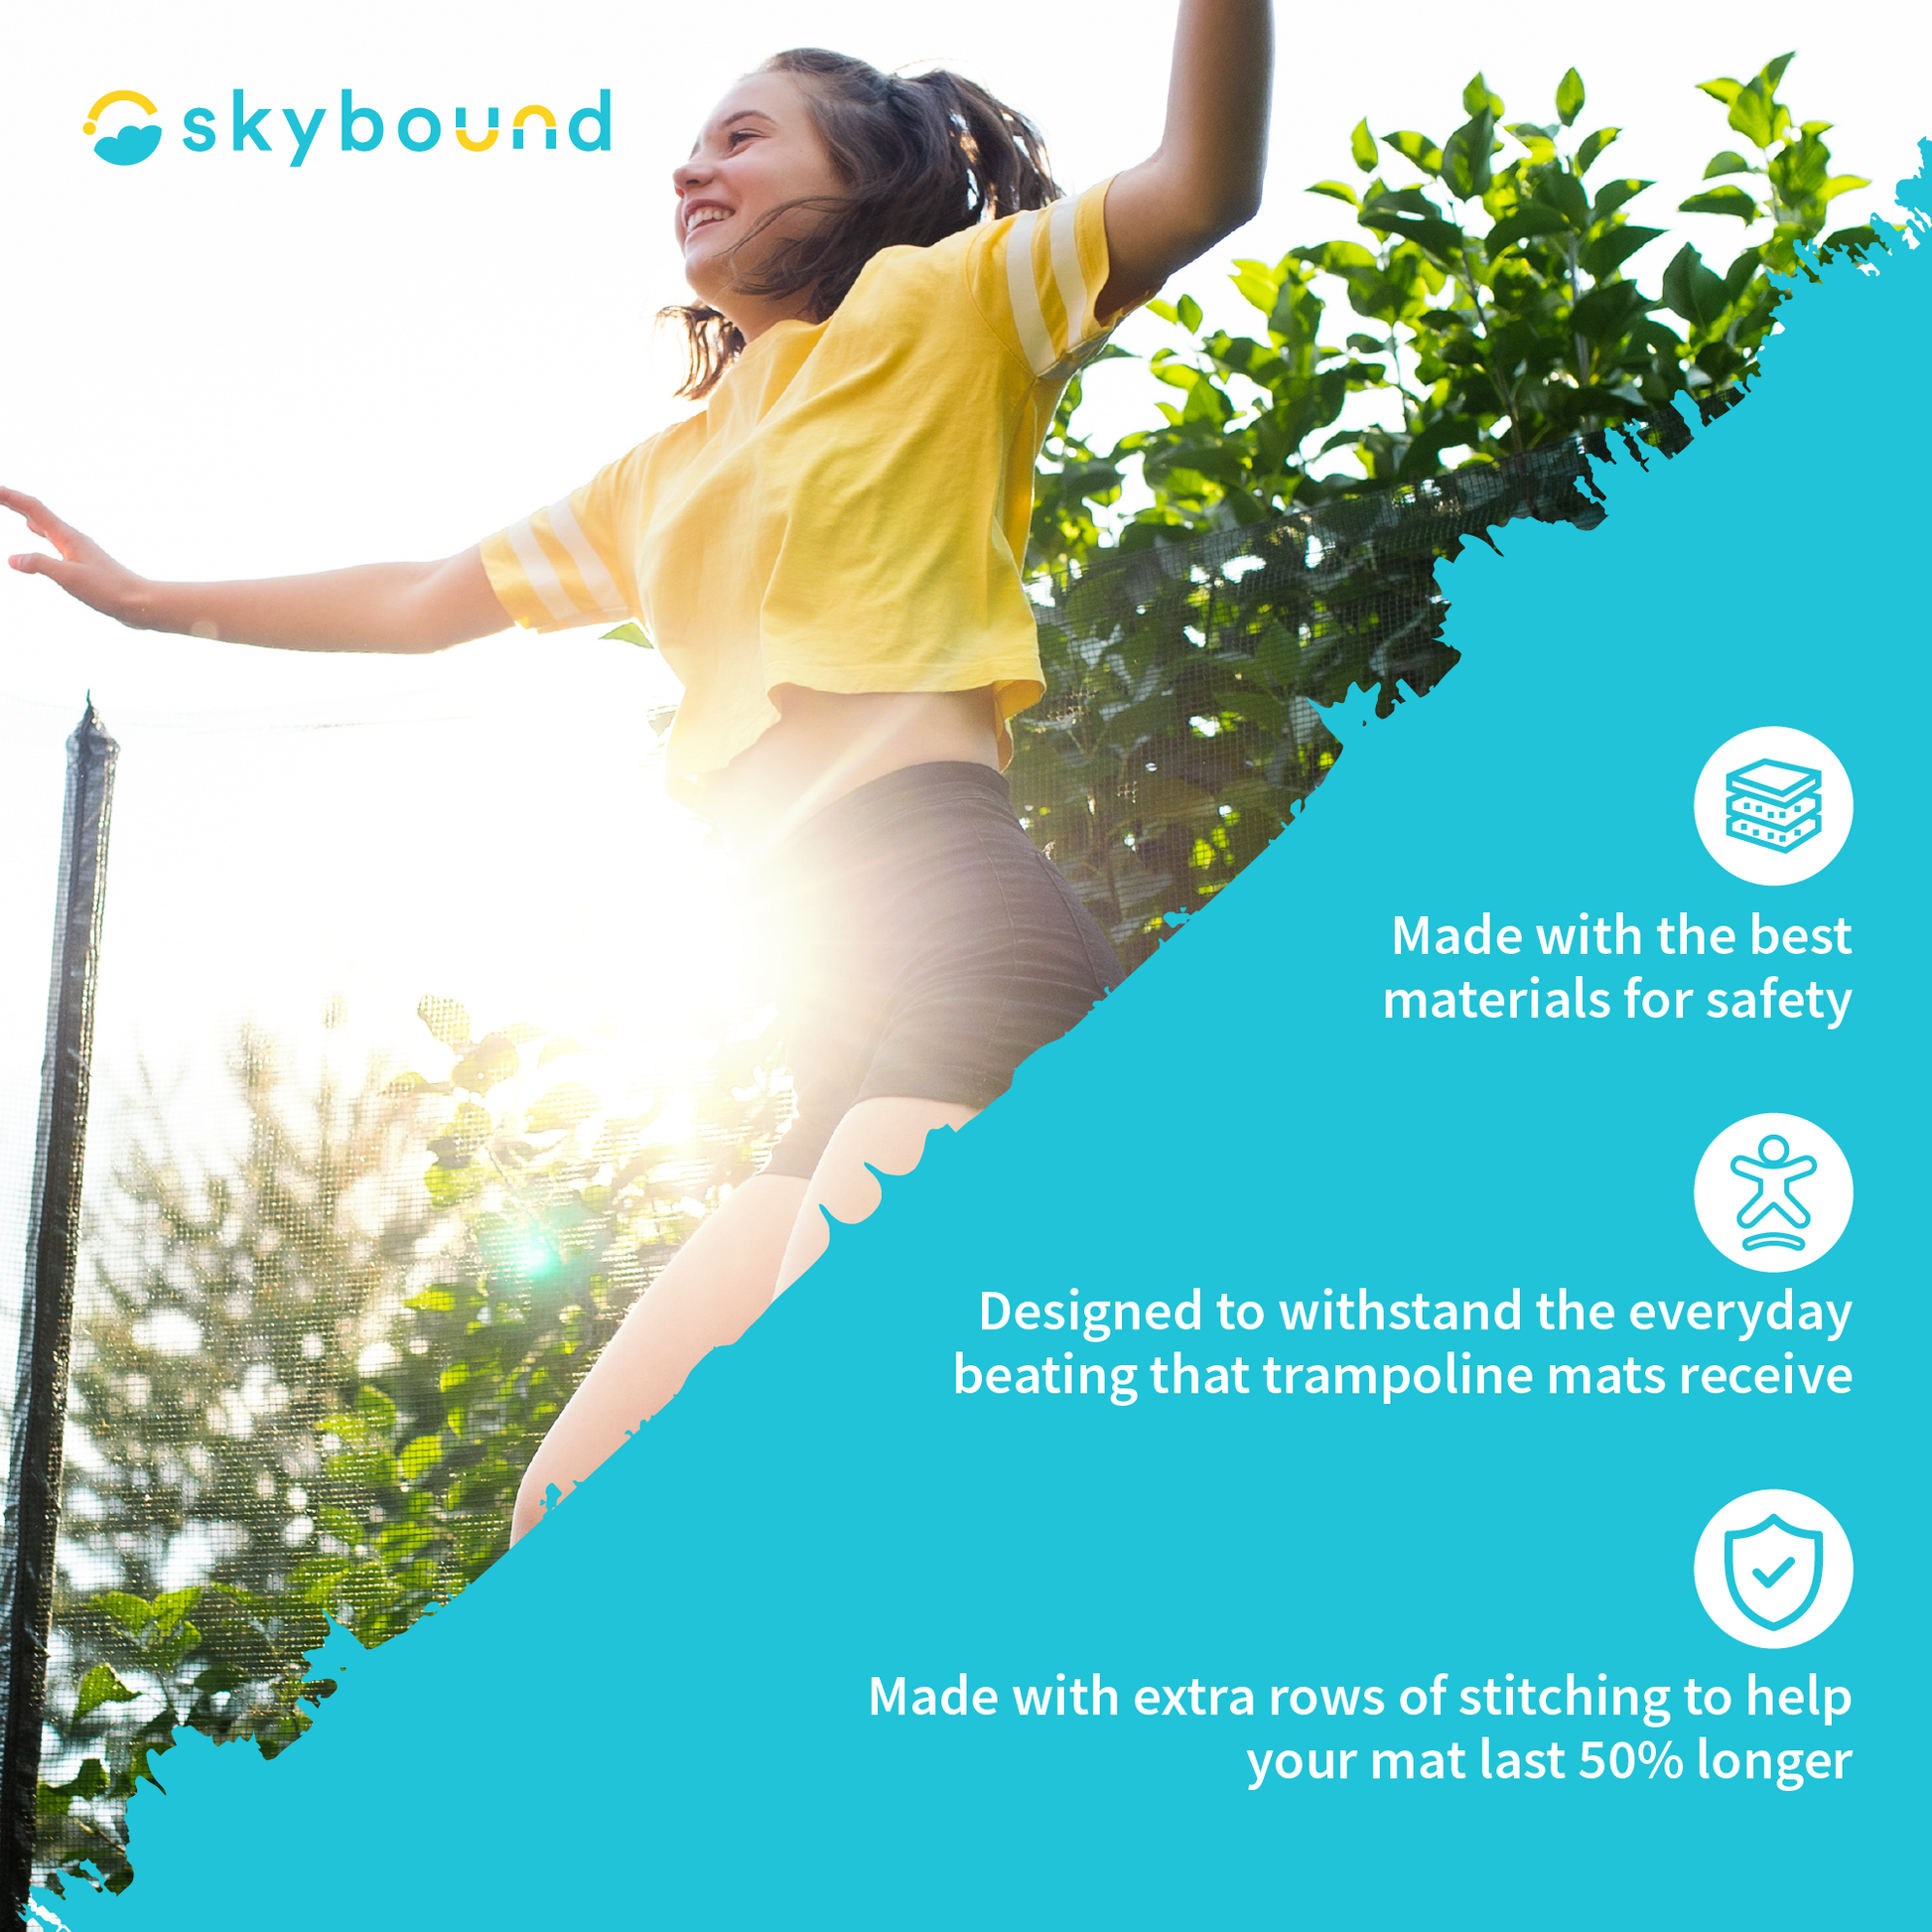 SkyBound: Products Made with the best materials for safety, Designed to withstand the everyday beating that trampoline mats receive, Made with extra rows of stitching to help your mat last 50% longer.  